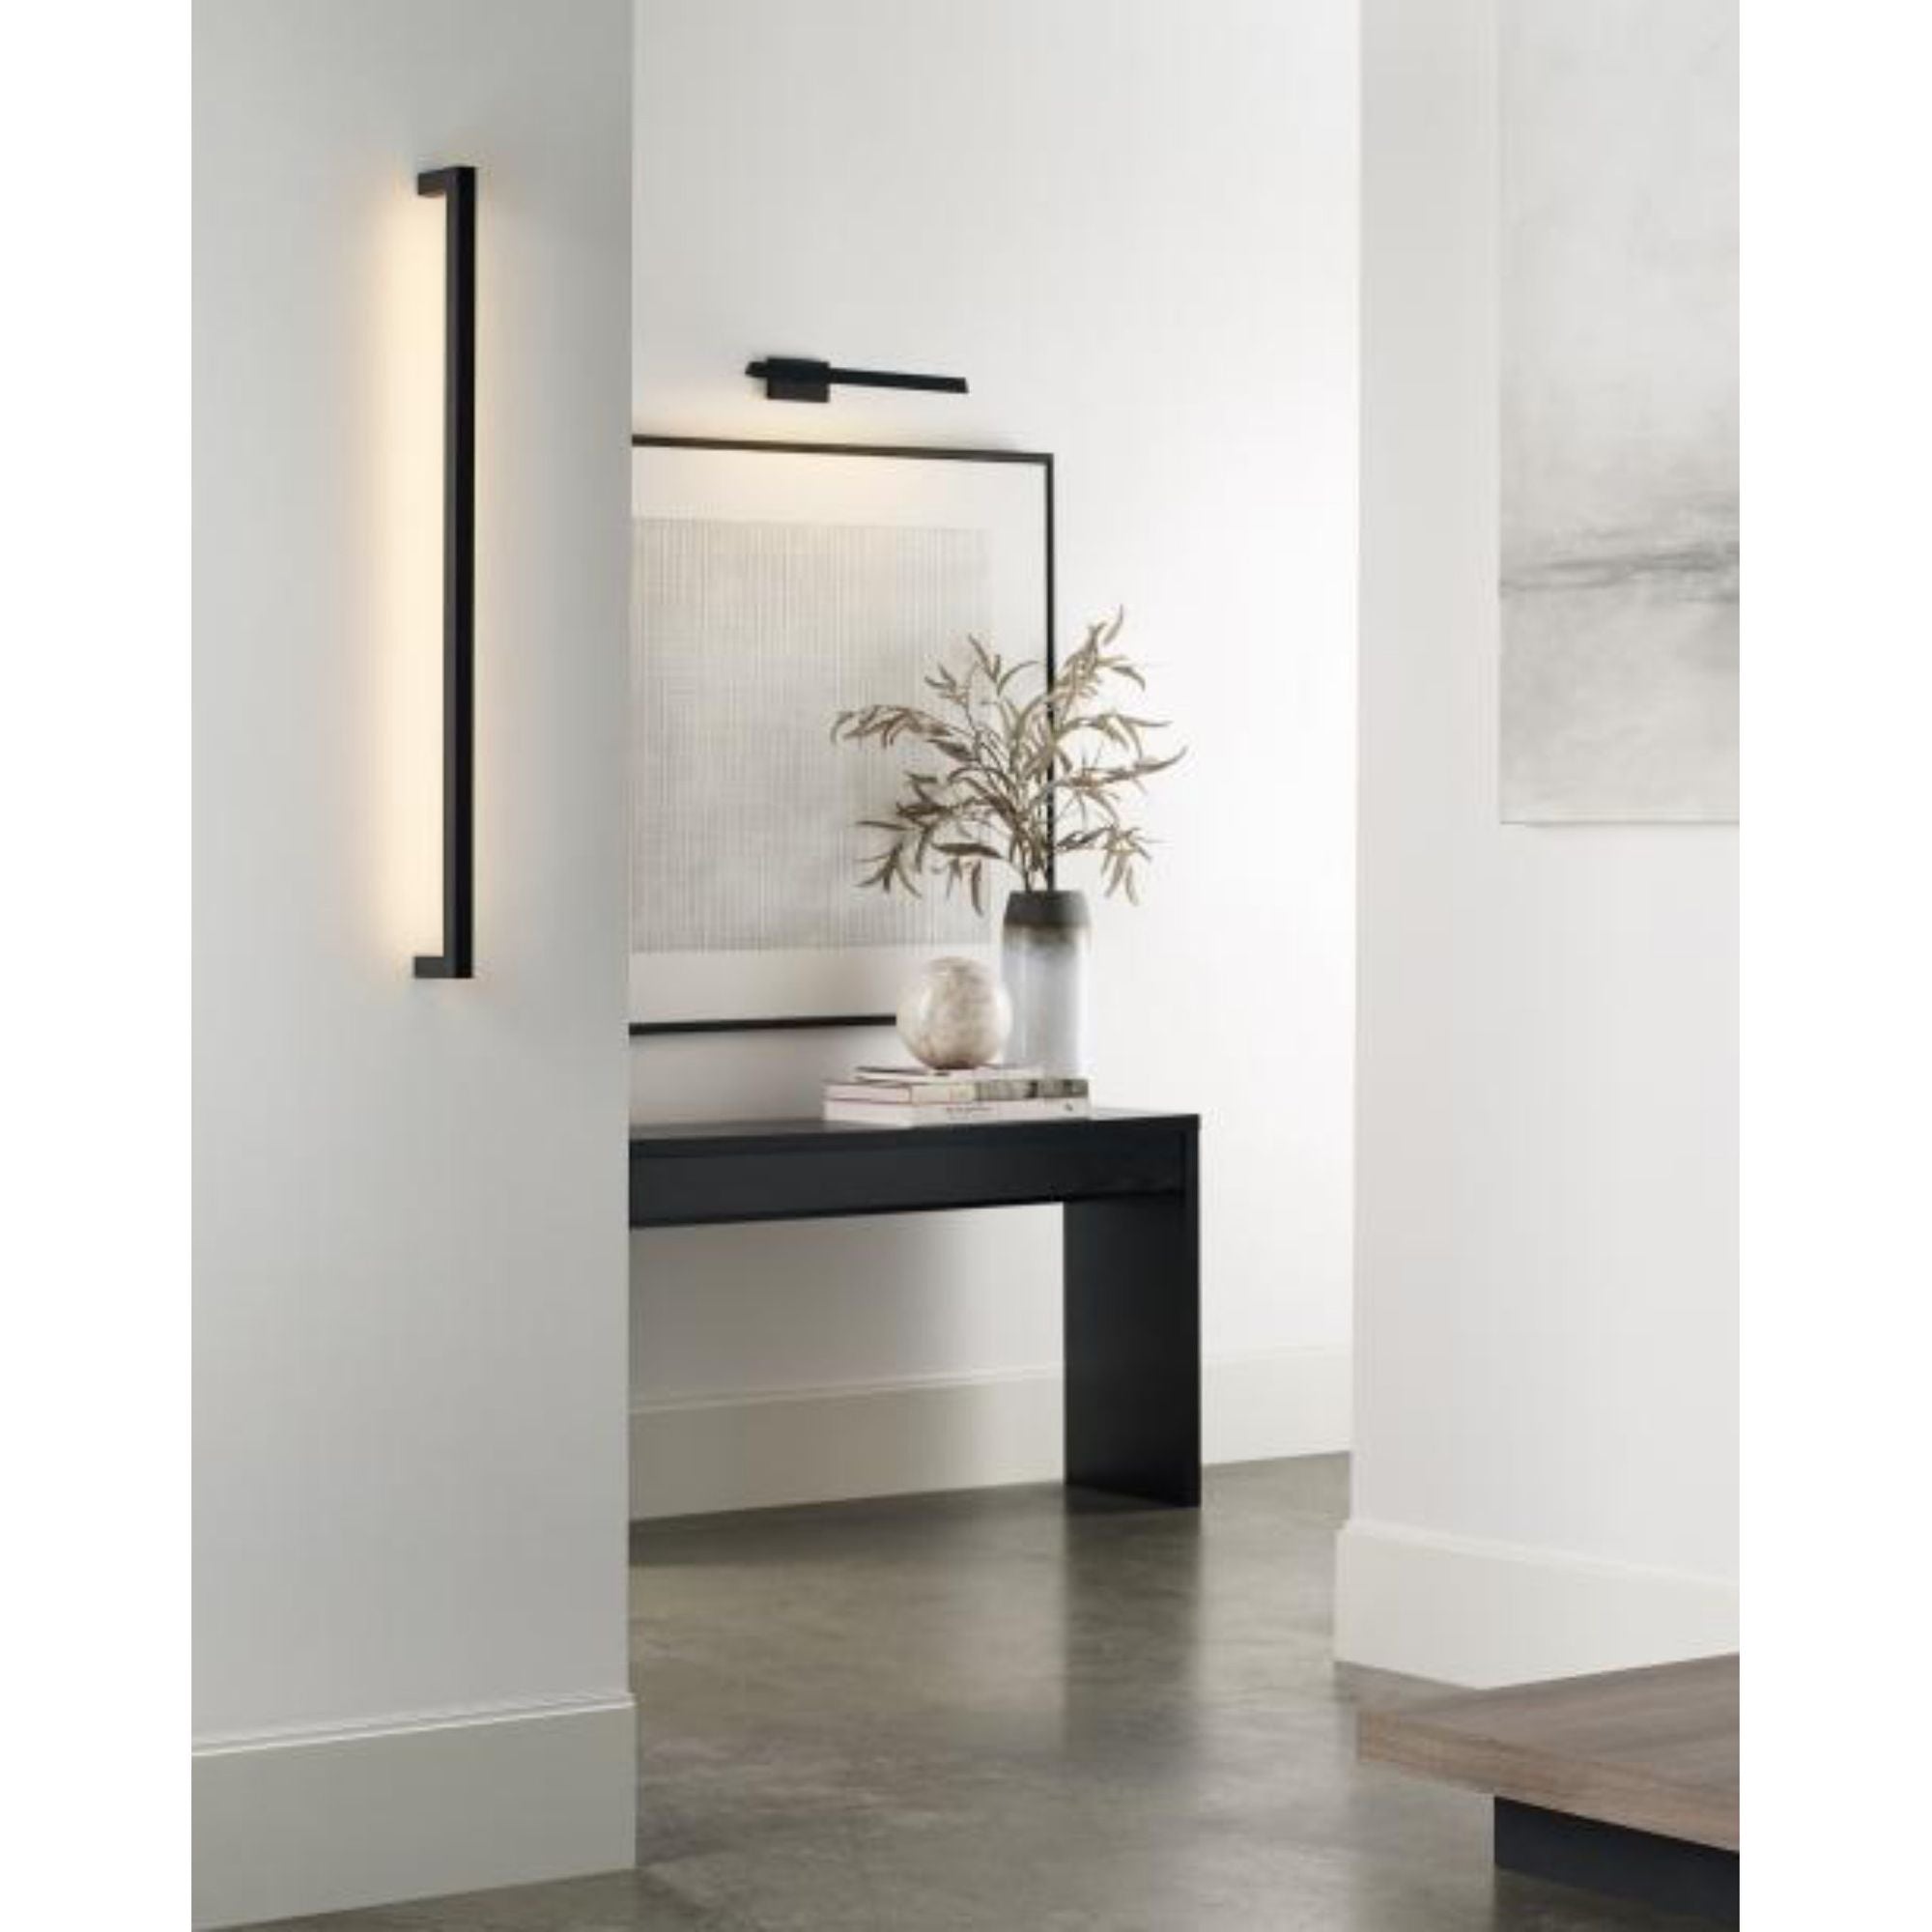 Dessau 24 Picture Light Wall Collection 1-Light LED 3000K Nightshade Black by Sean Lavin